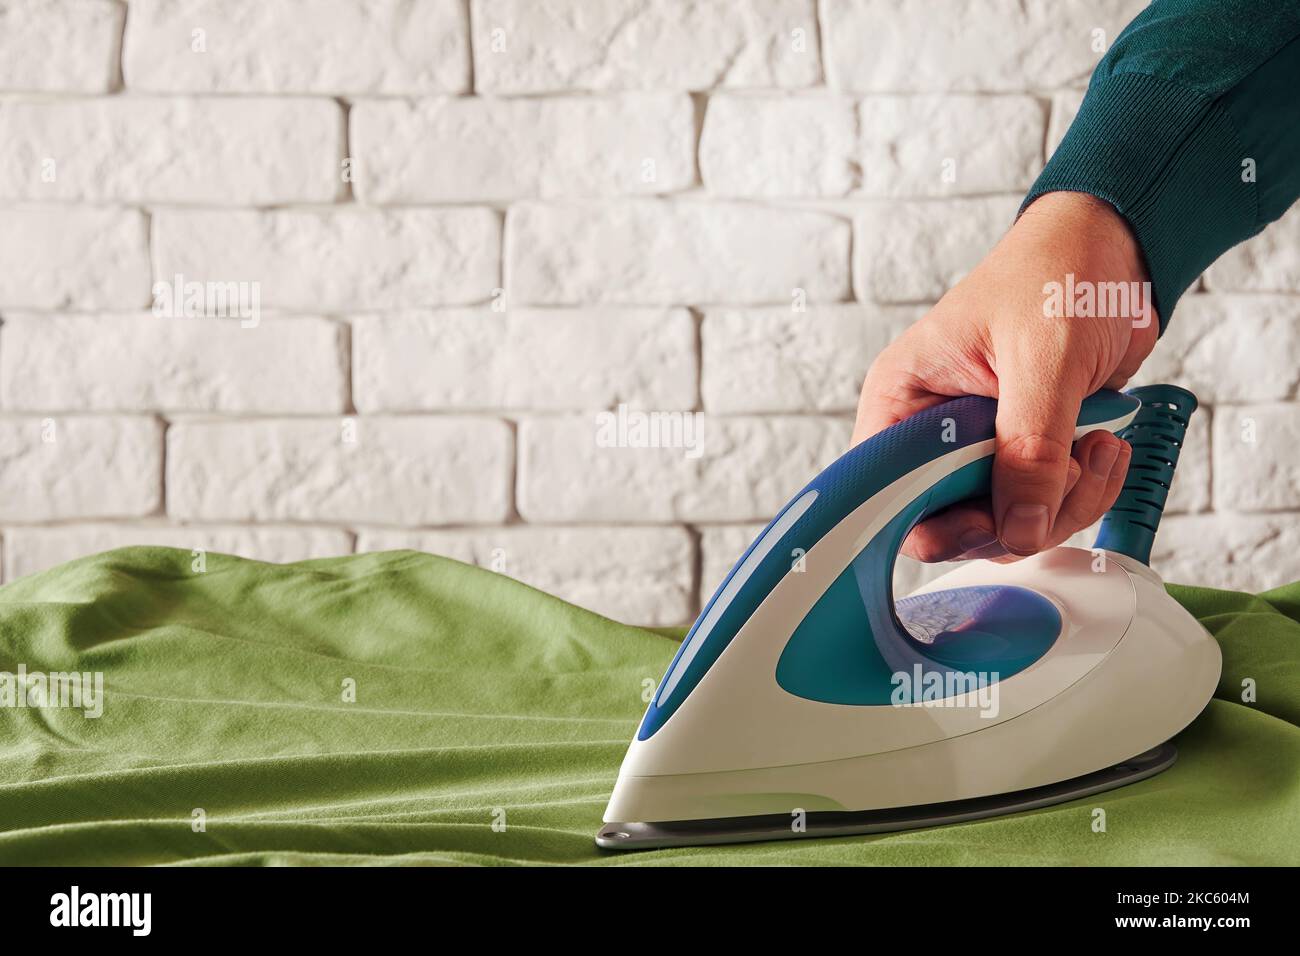 Man holding modern iron in hand and smooths wrinkled green shirt. Housework and laundry backgrounds. Copy space for text Stock Photo